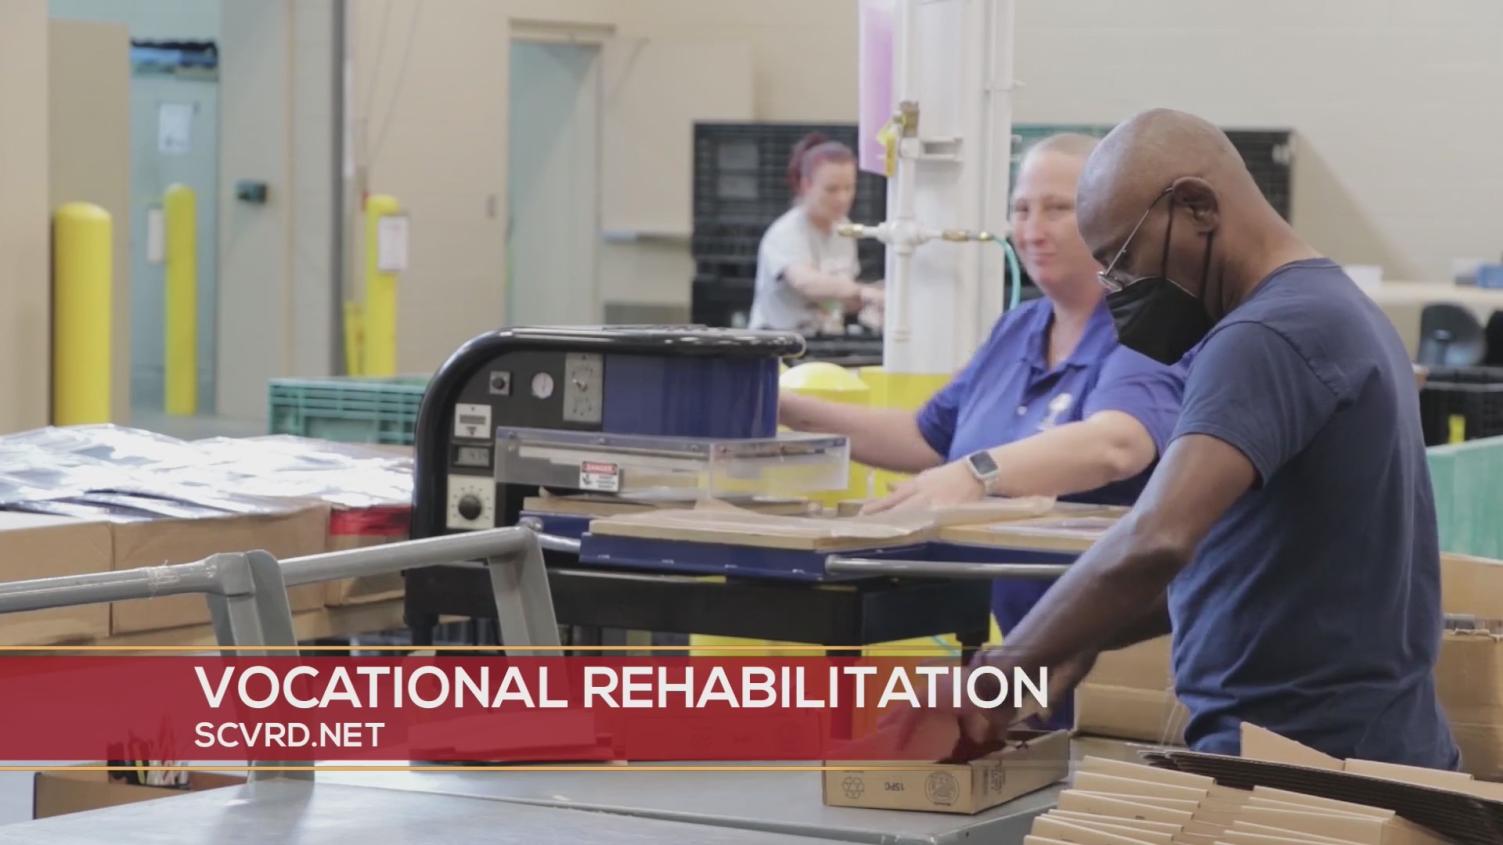 What Are Some Resources For More Information About Vocational Rehabilitation?